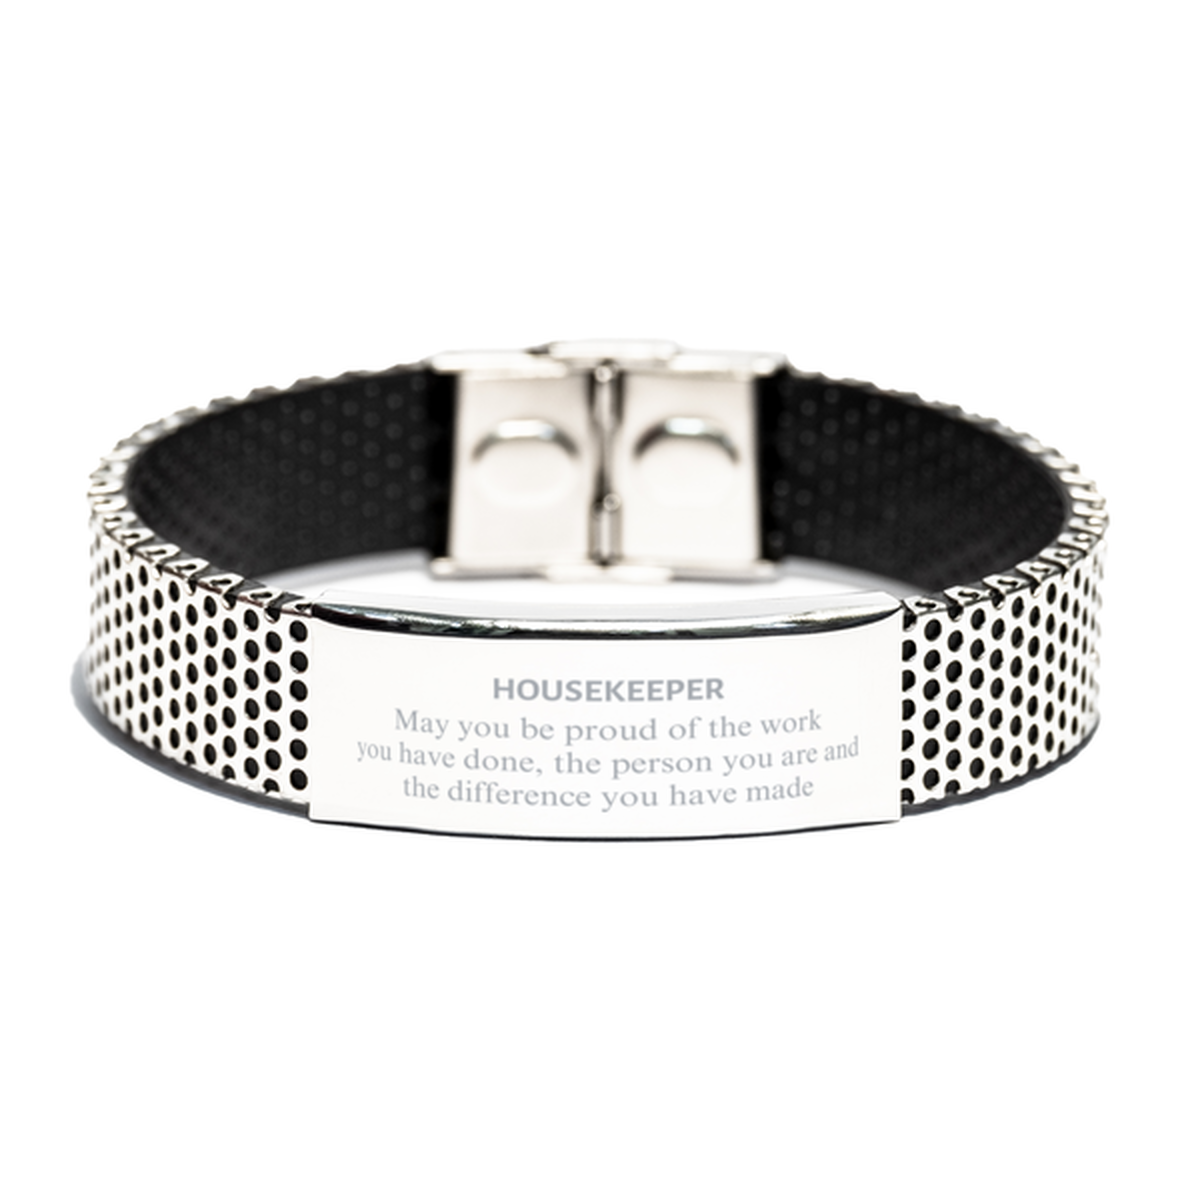 Housekeeper May you be proud of the work you have done, Retirement Housekeeper Stainless Steel Bracelet for Colleague Appreciation Gifts Amazing for Housekeeper